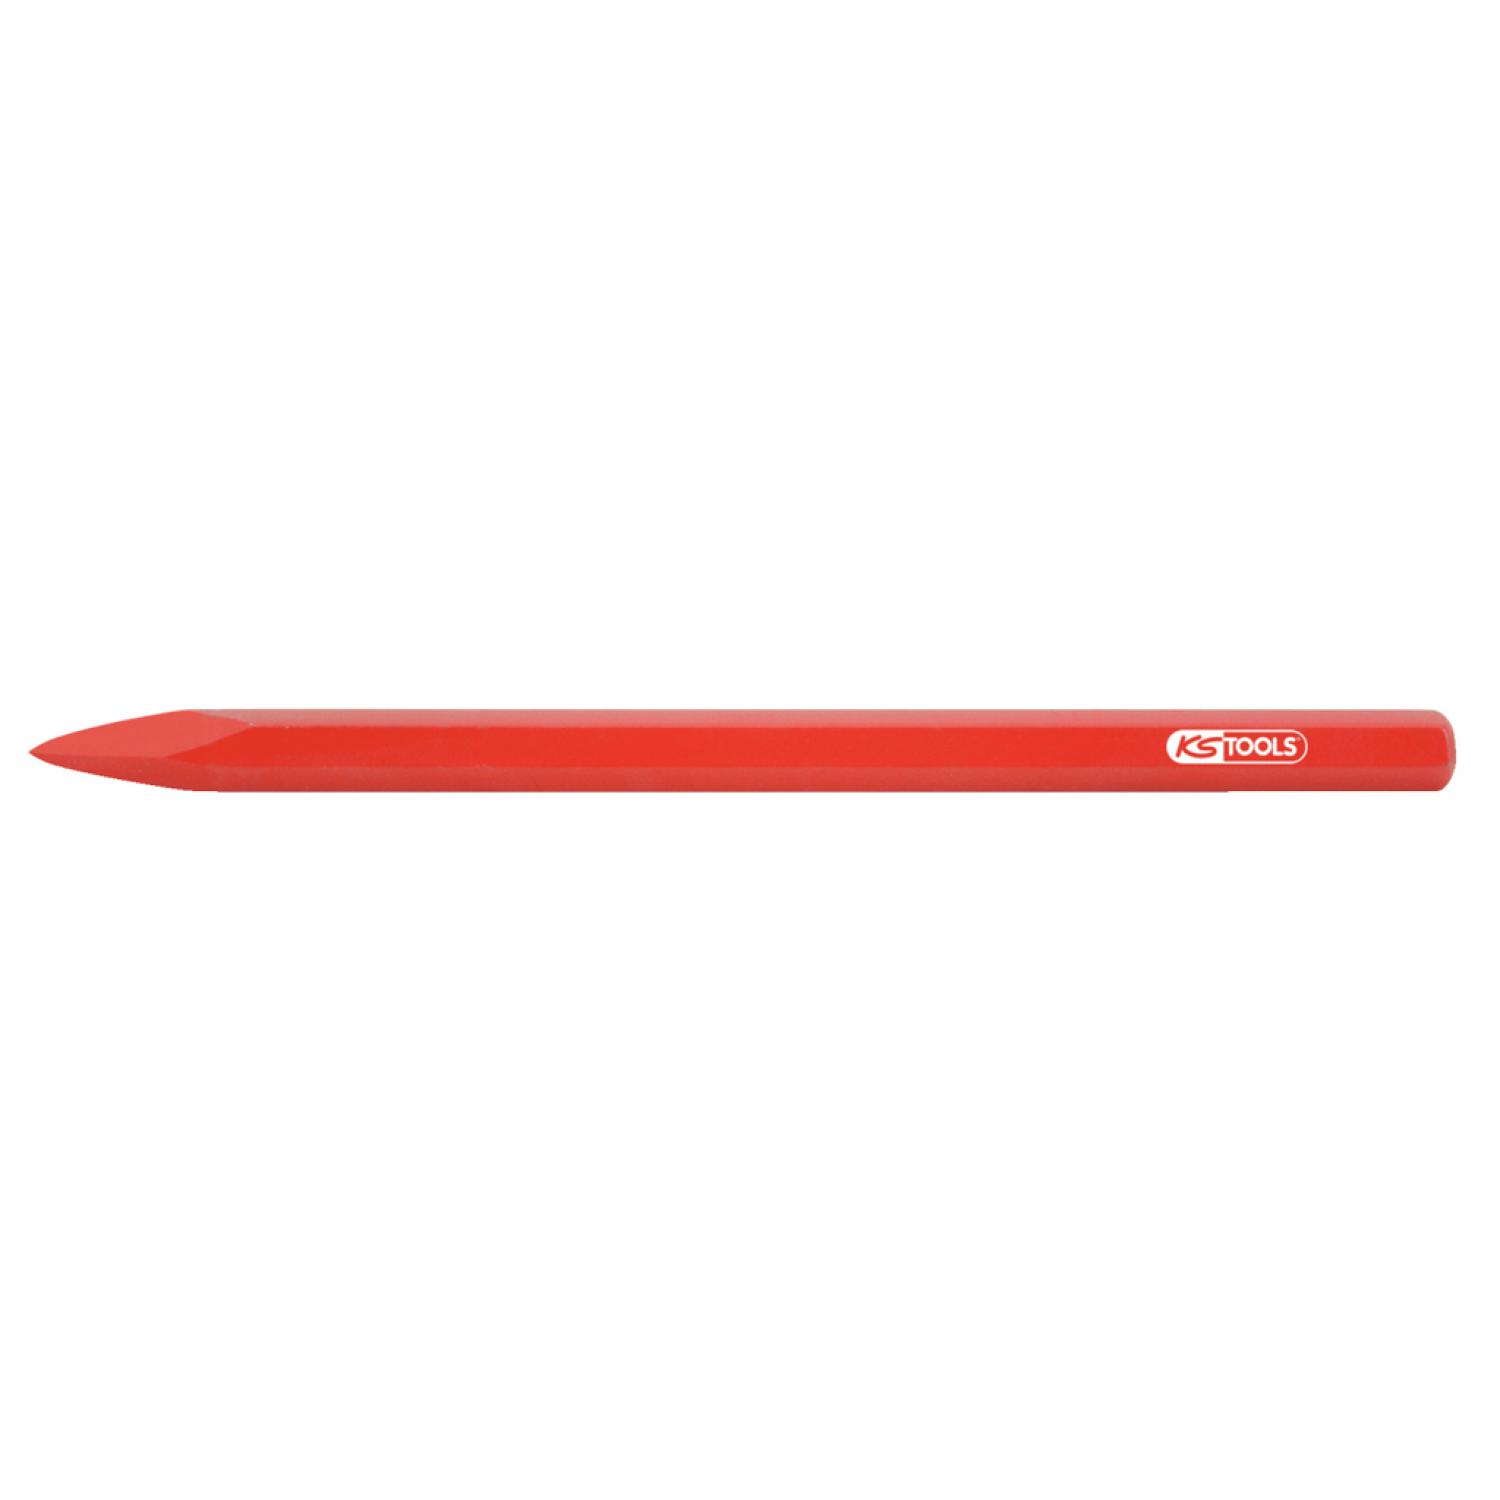 Pointed chisel, 10x200mm